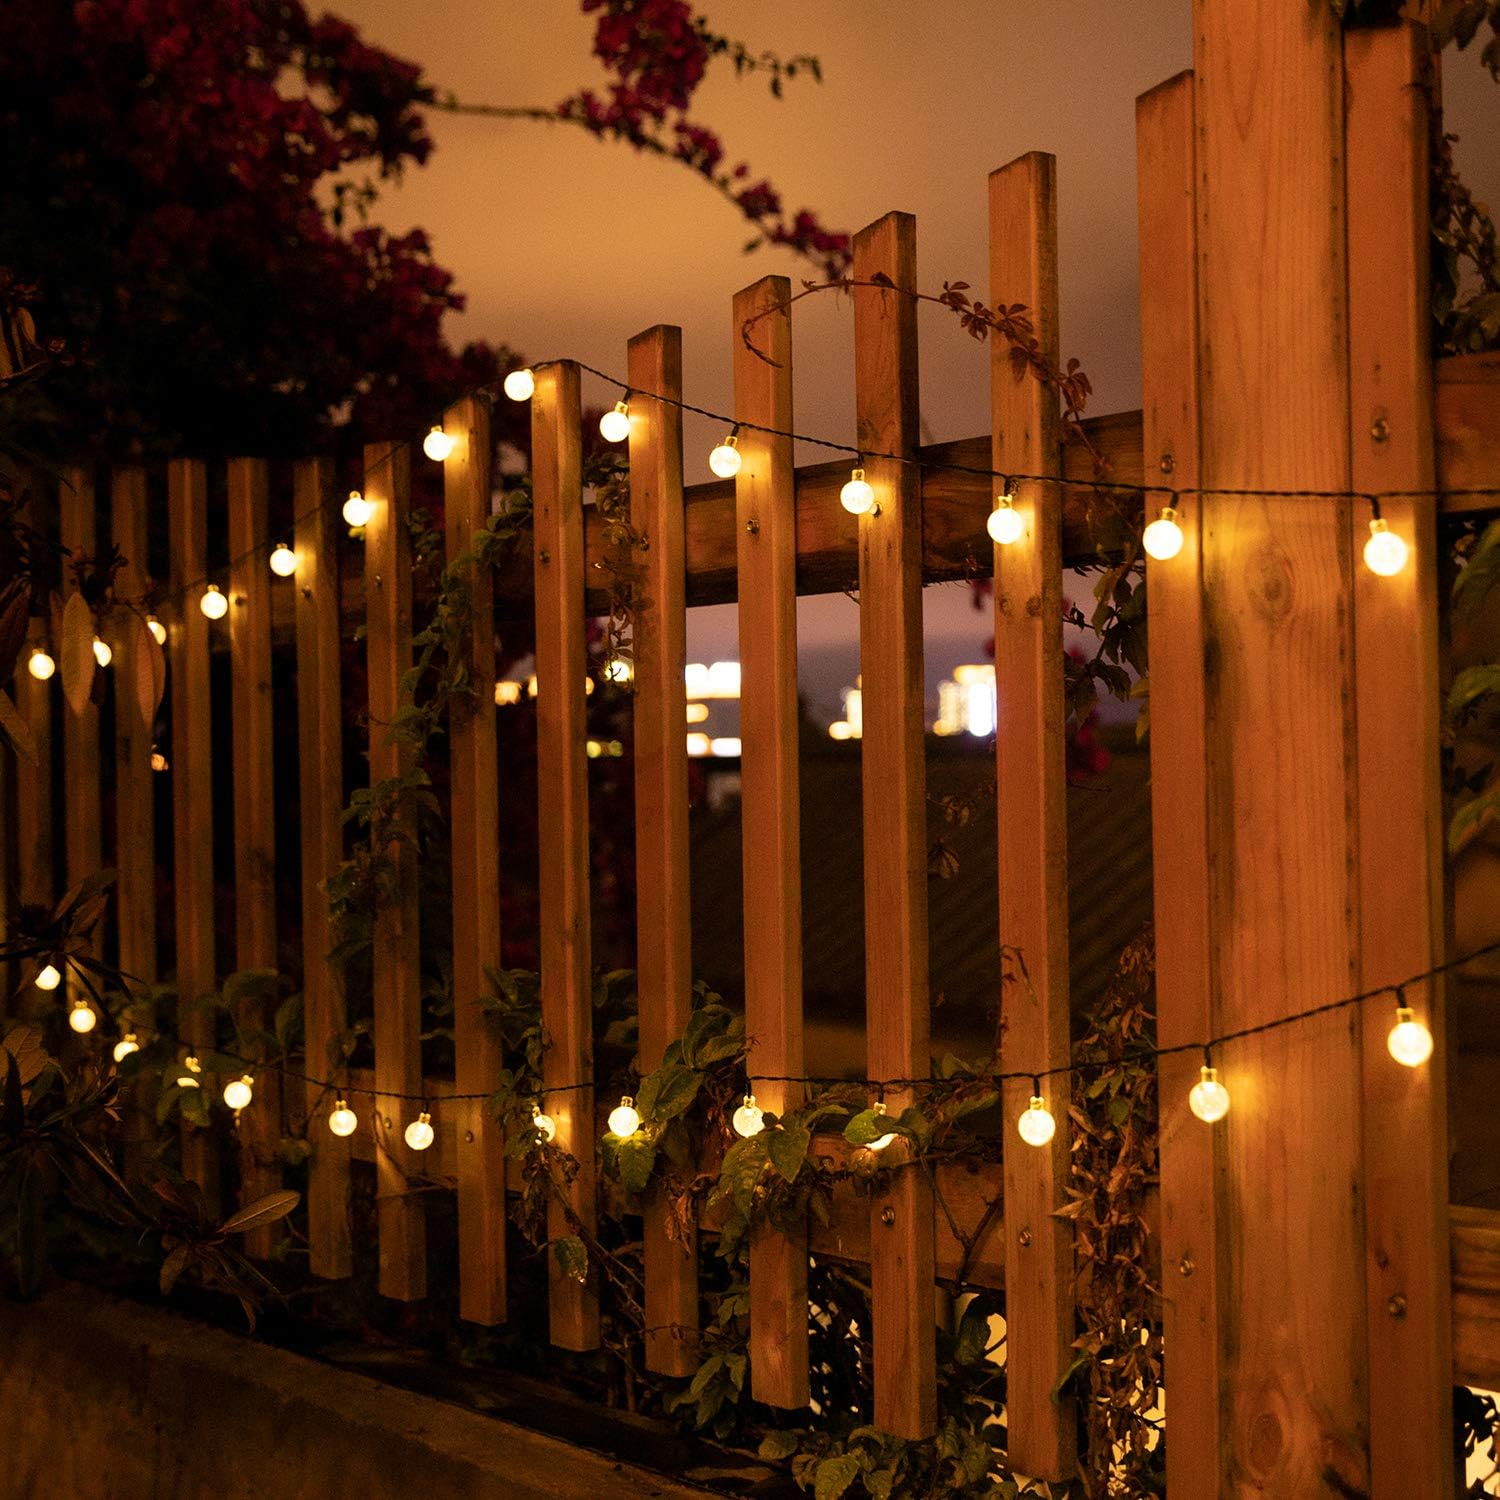 'Like little fireflies': These solar-powered string lights are down to $14